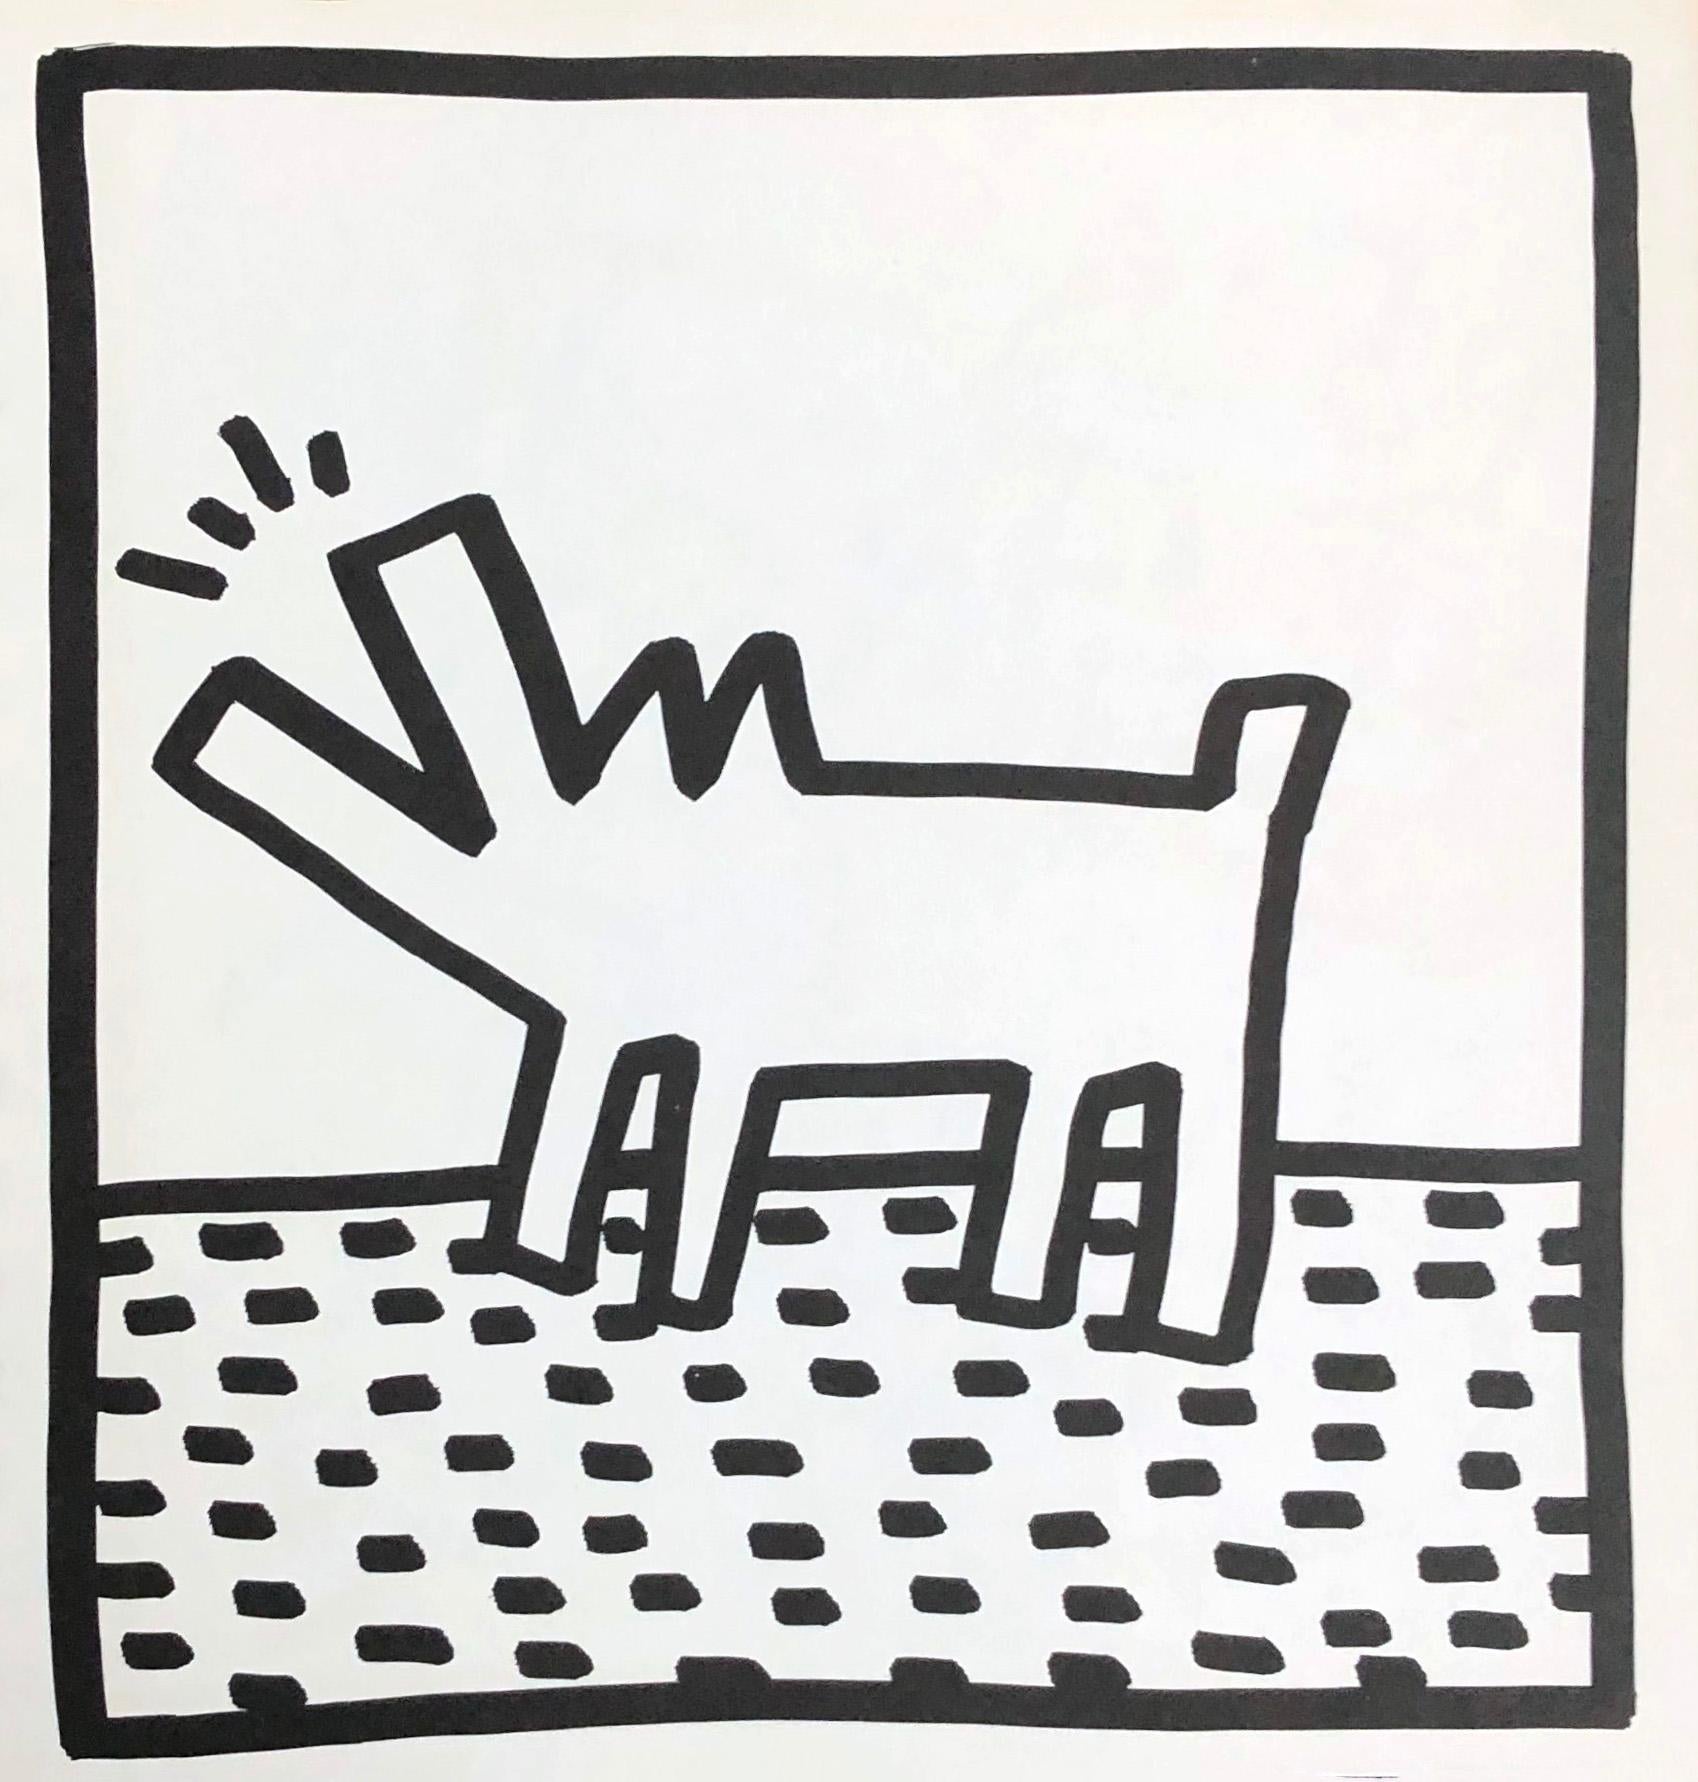 Keith Haring (untitled) Barking Dog Lithograph 1982
Double-sided offset lithograph published by Tony Shafrazi Gallery, New York, 1982 from an edition of 2000. 

Single sheet lithograph from the seminal spiral bound, early monograph showcasing